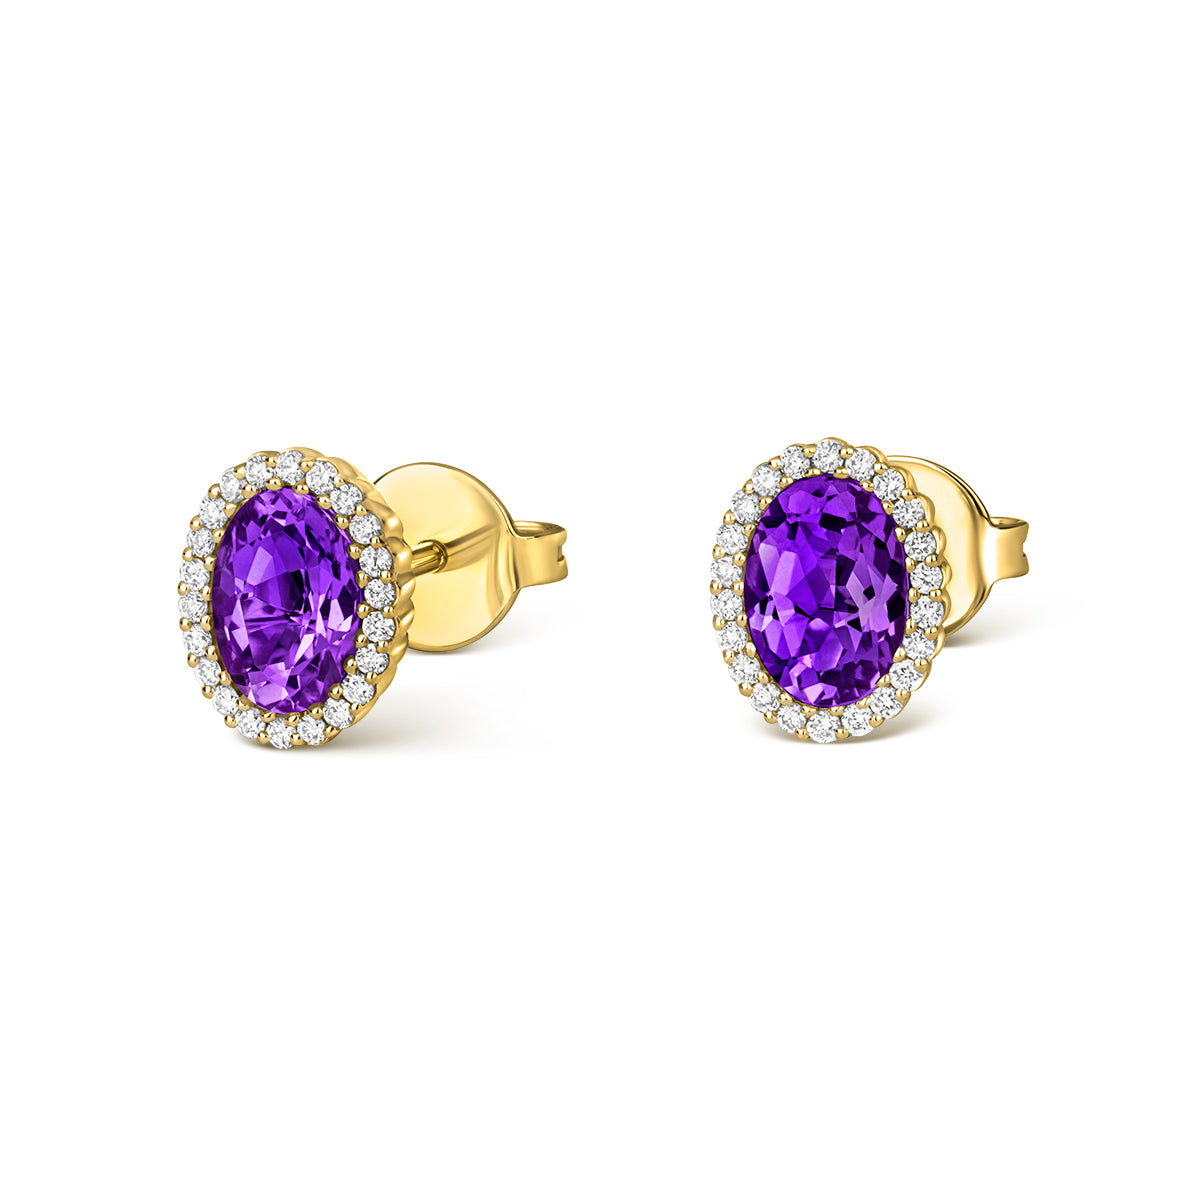 18ct Yellow Gold Oval Cut Amethyst and Diamond Earrings